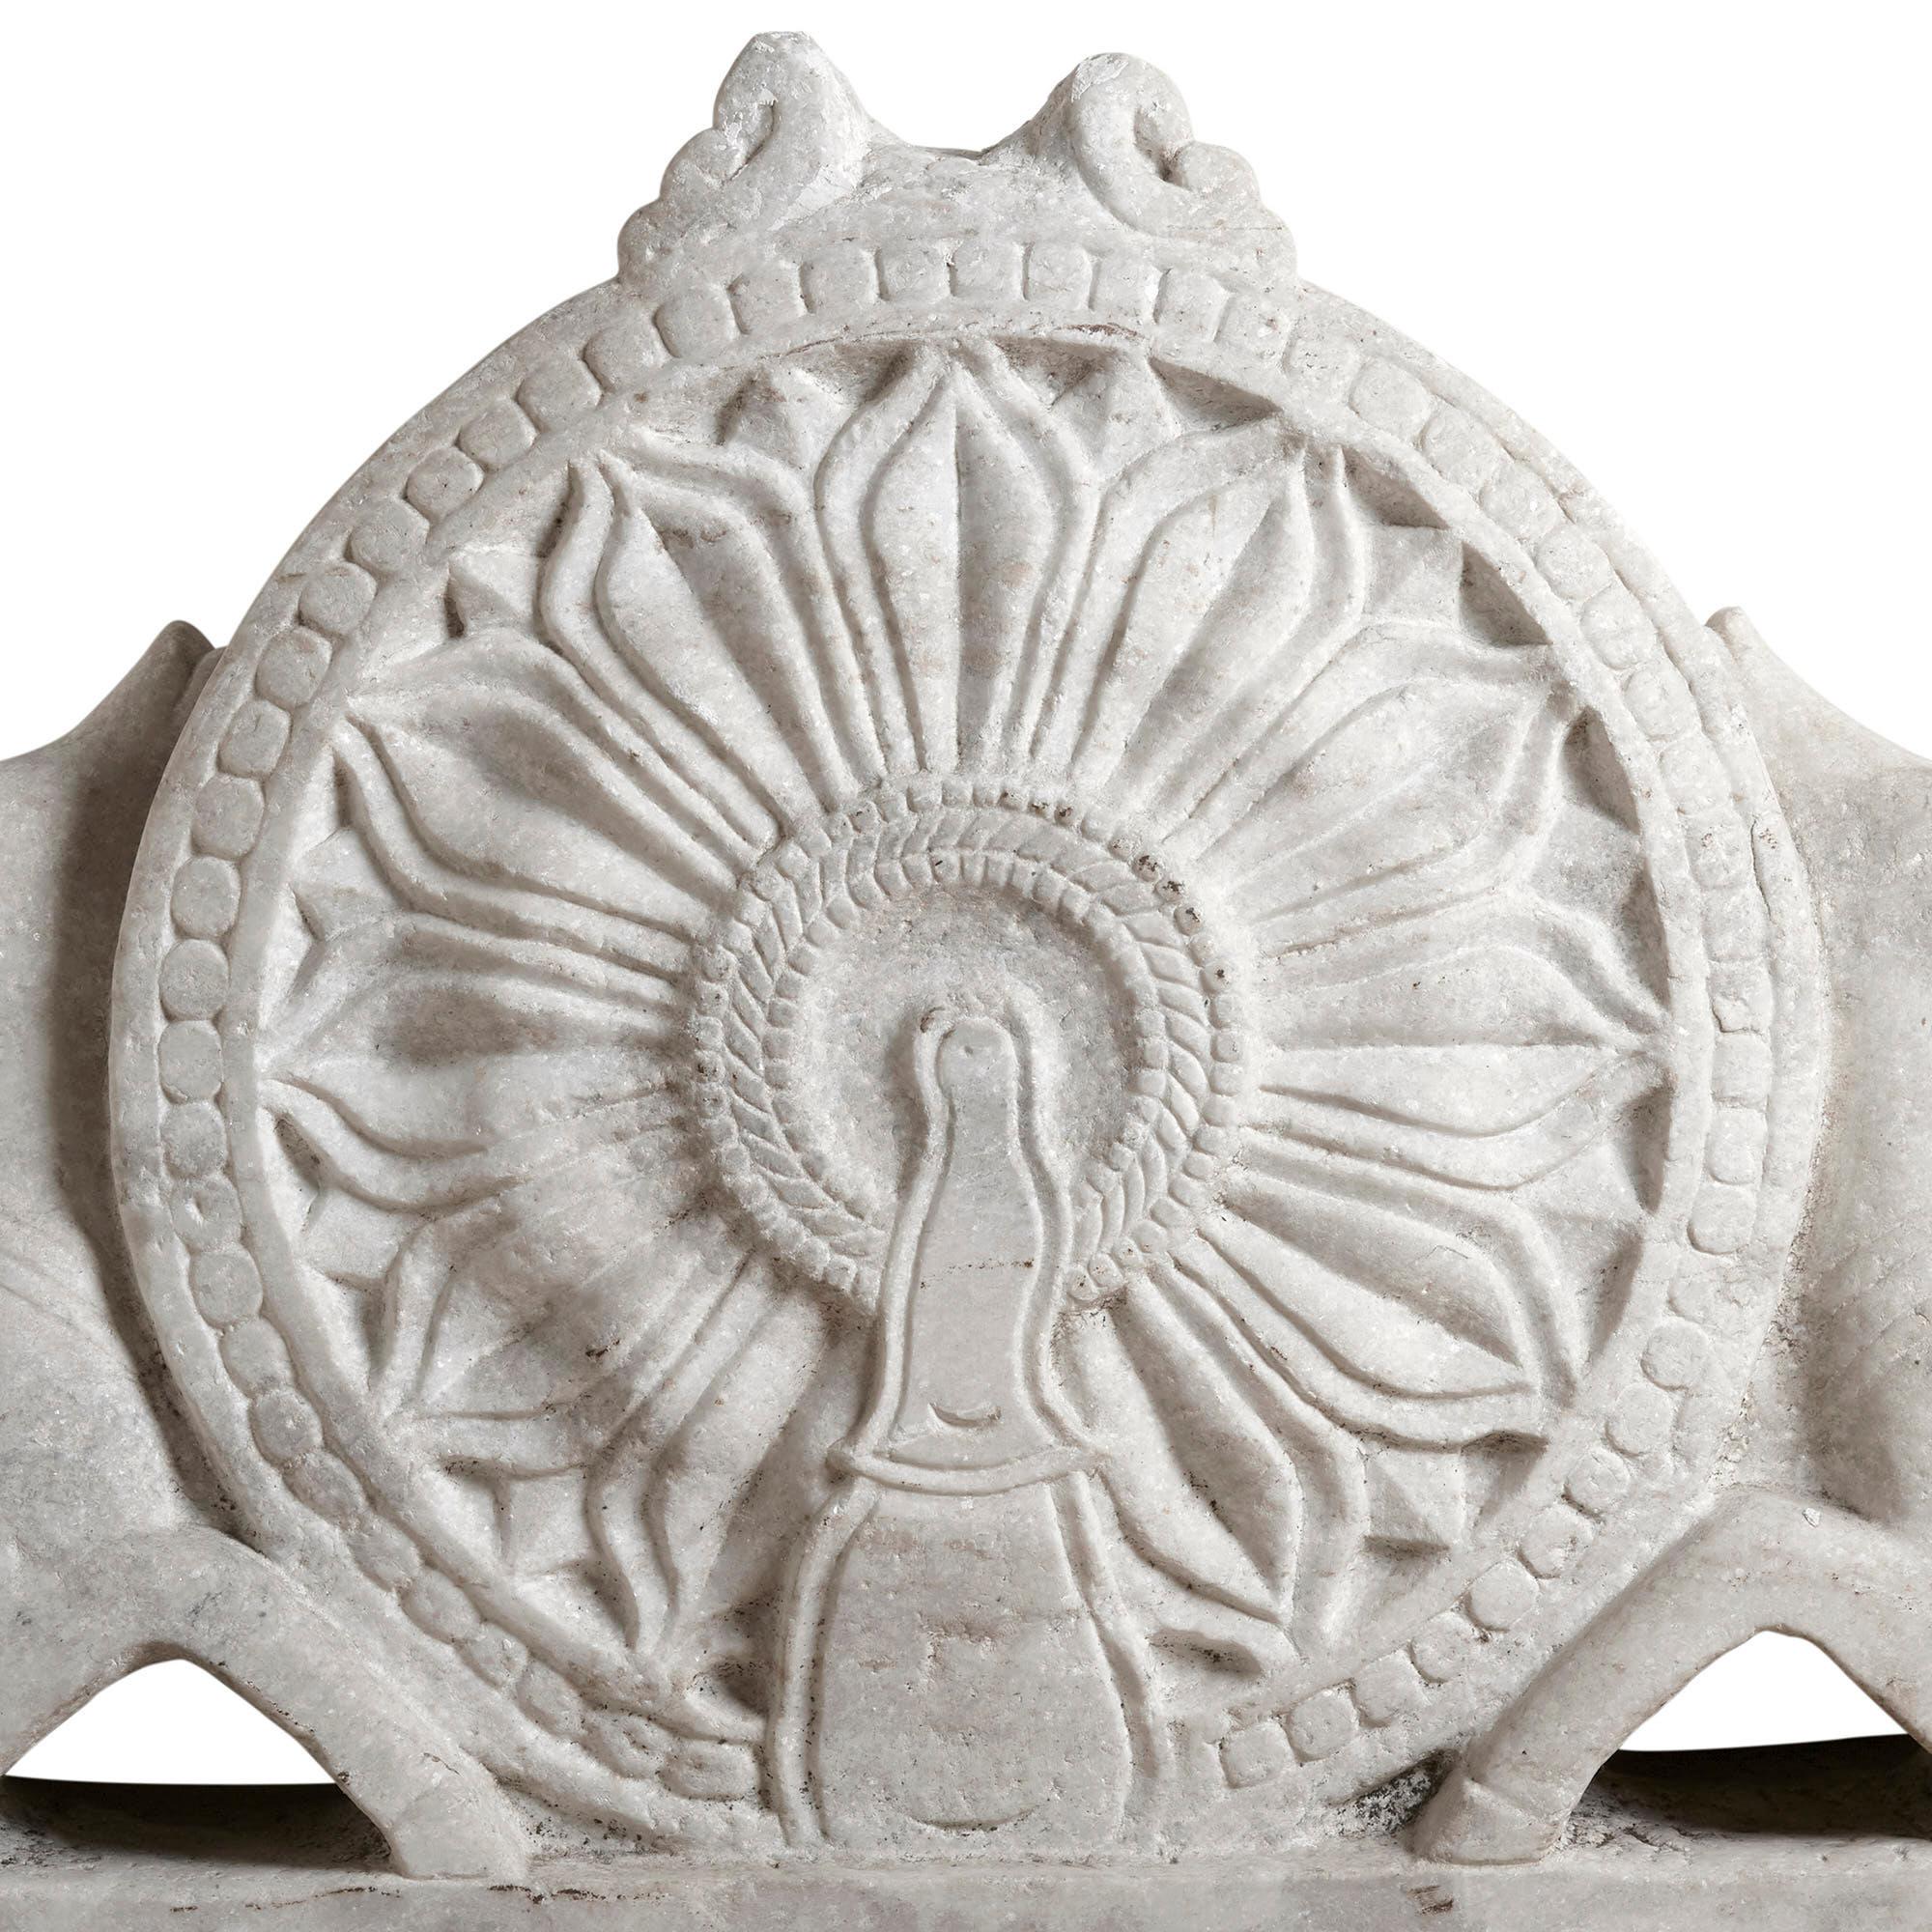 Large antique Indian carved marble lintel
Indian, 18th century
Measures: Height 83cm, width 170cm, depth 22cm

Finely carved in white marble, this sculpture is a wonderful example of Indian Buddhist sculpture. It portrays a Dharma wheel with two